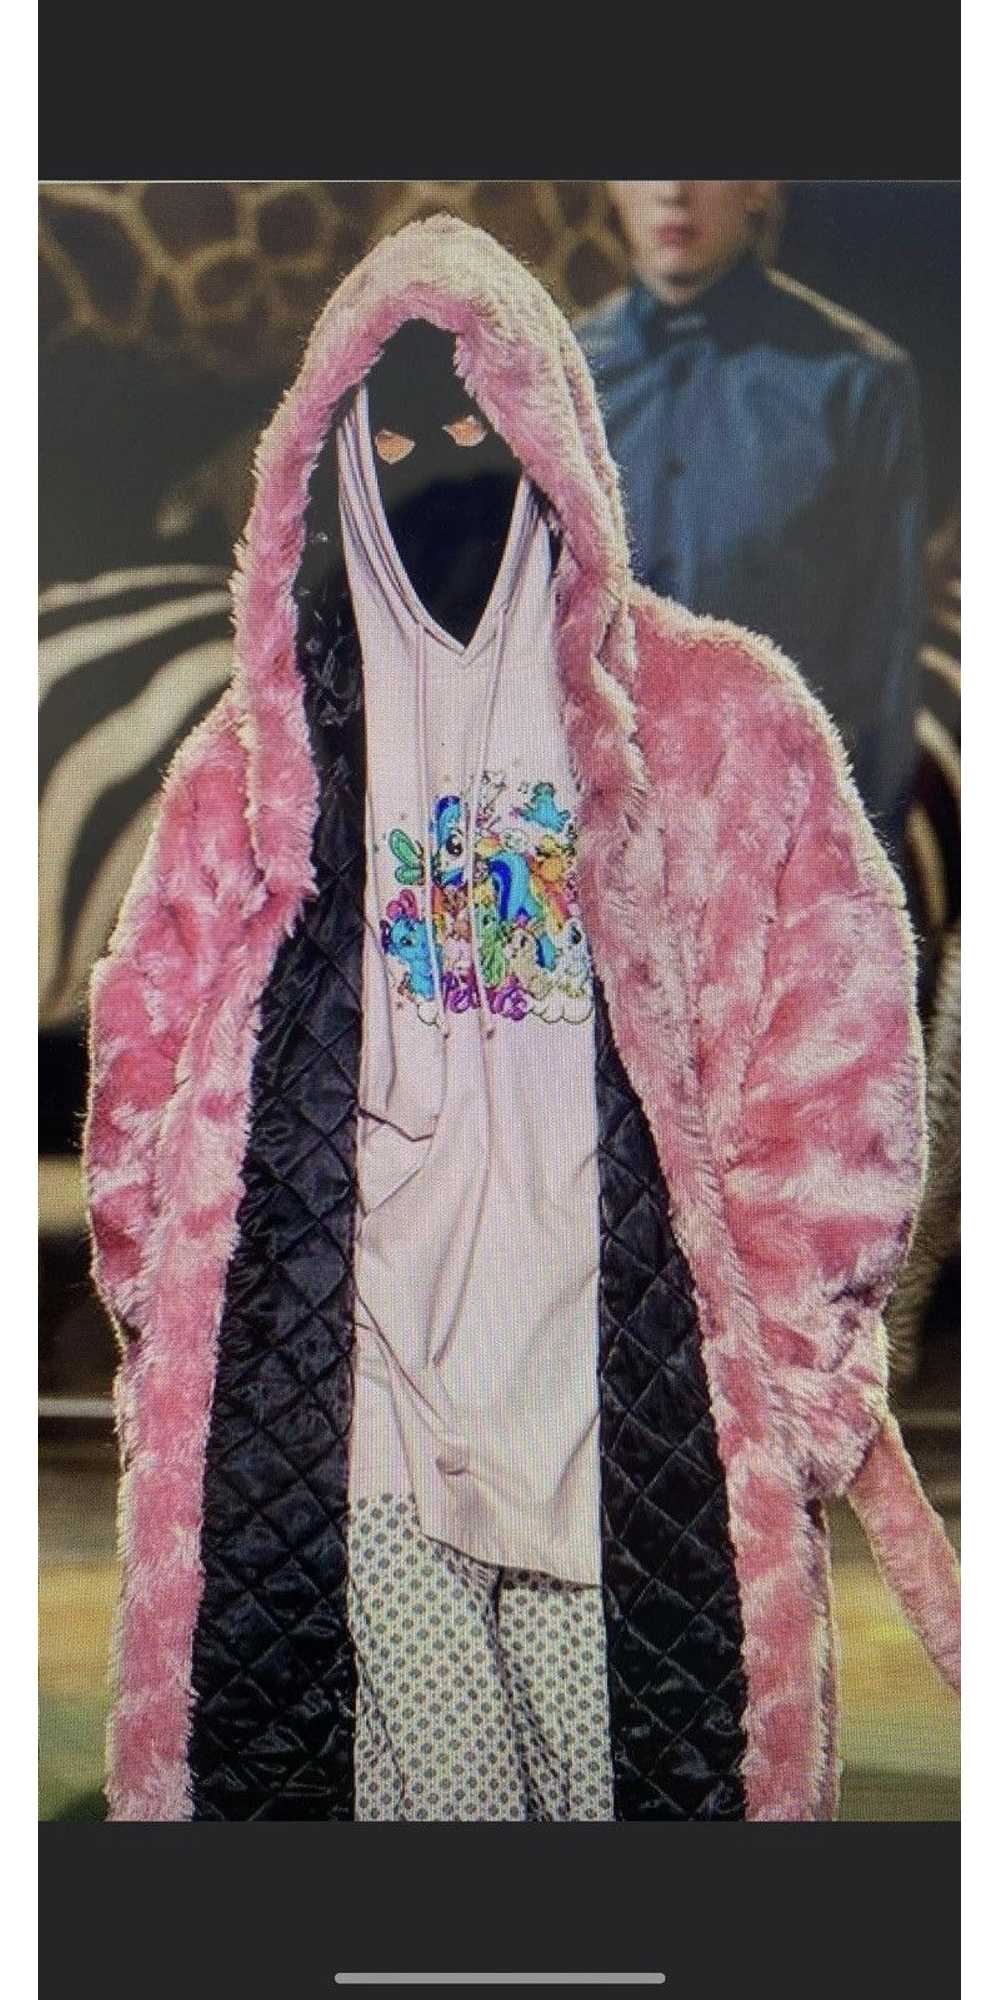 Vetements Vetements *Rare* Masked Pink Hoodie AW19 - image 2